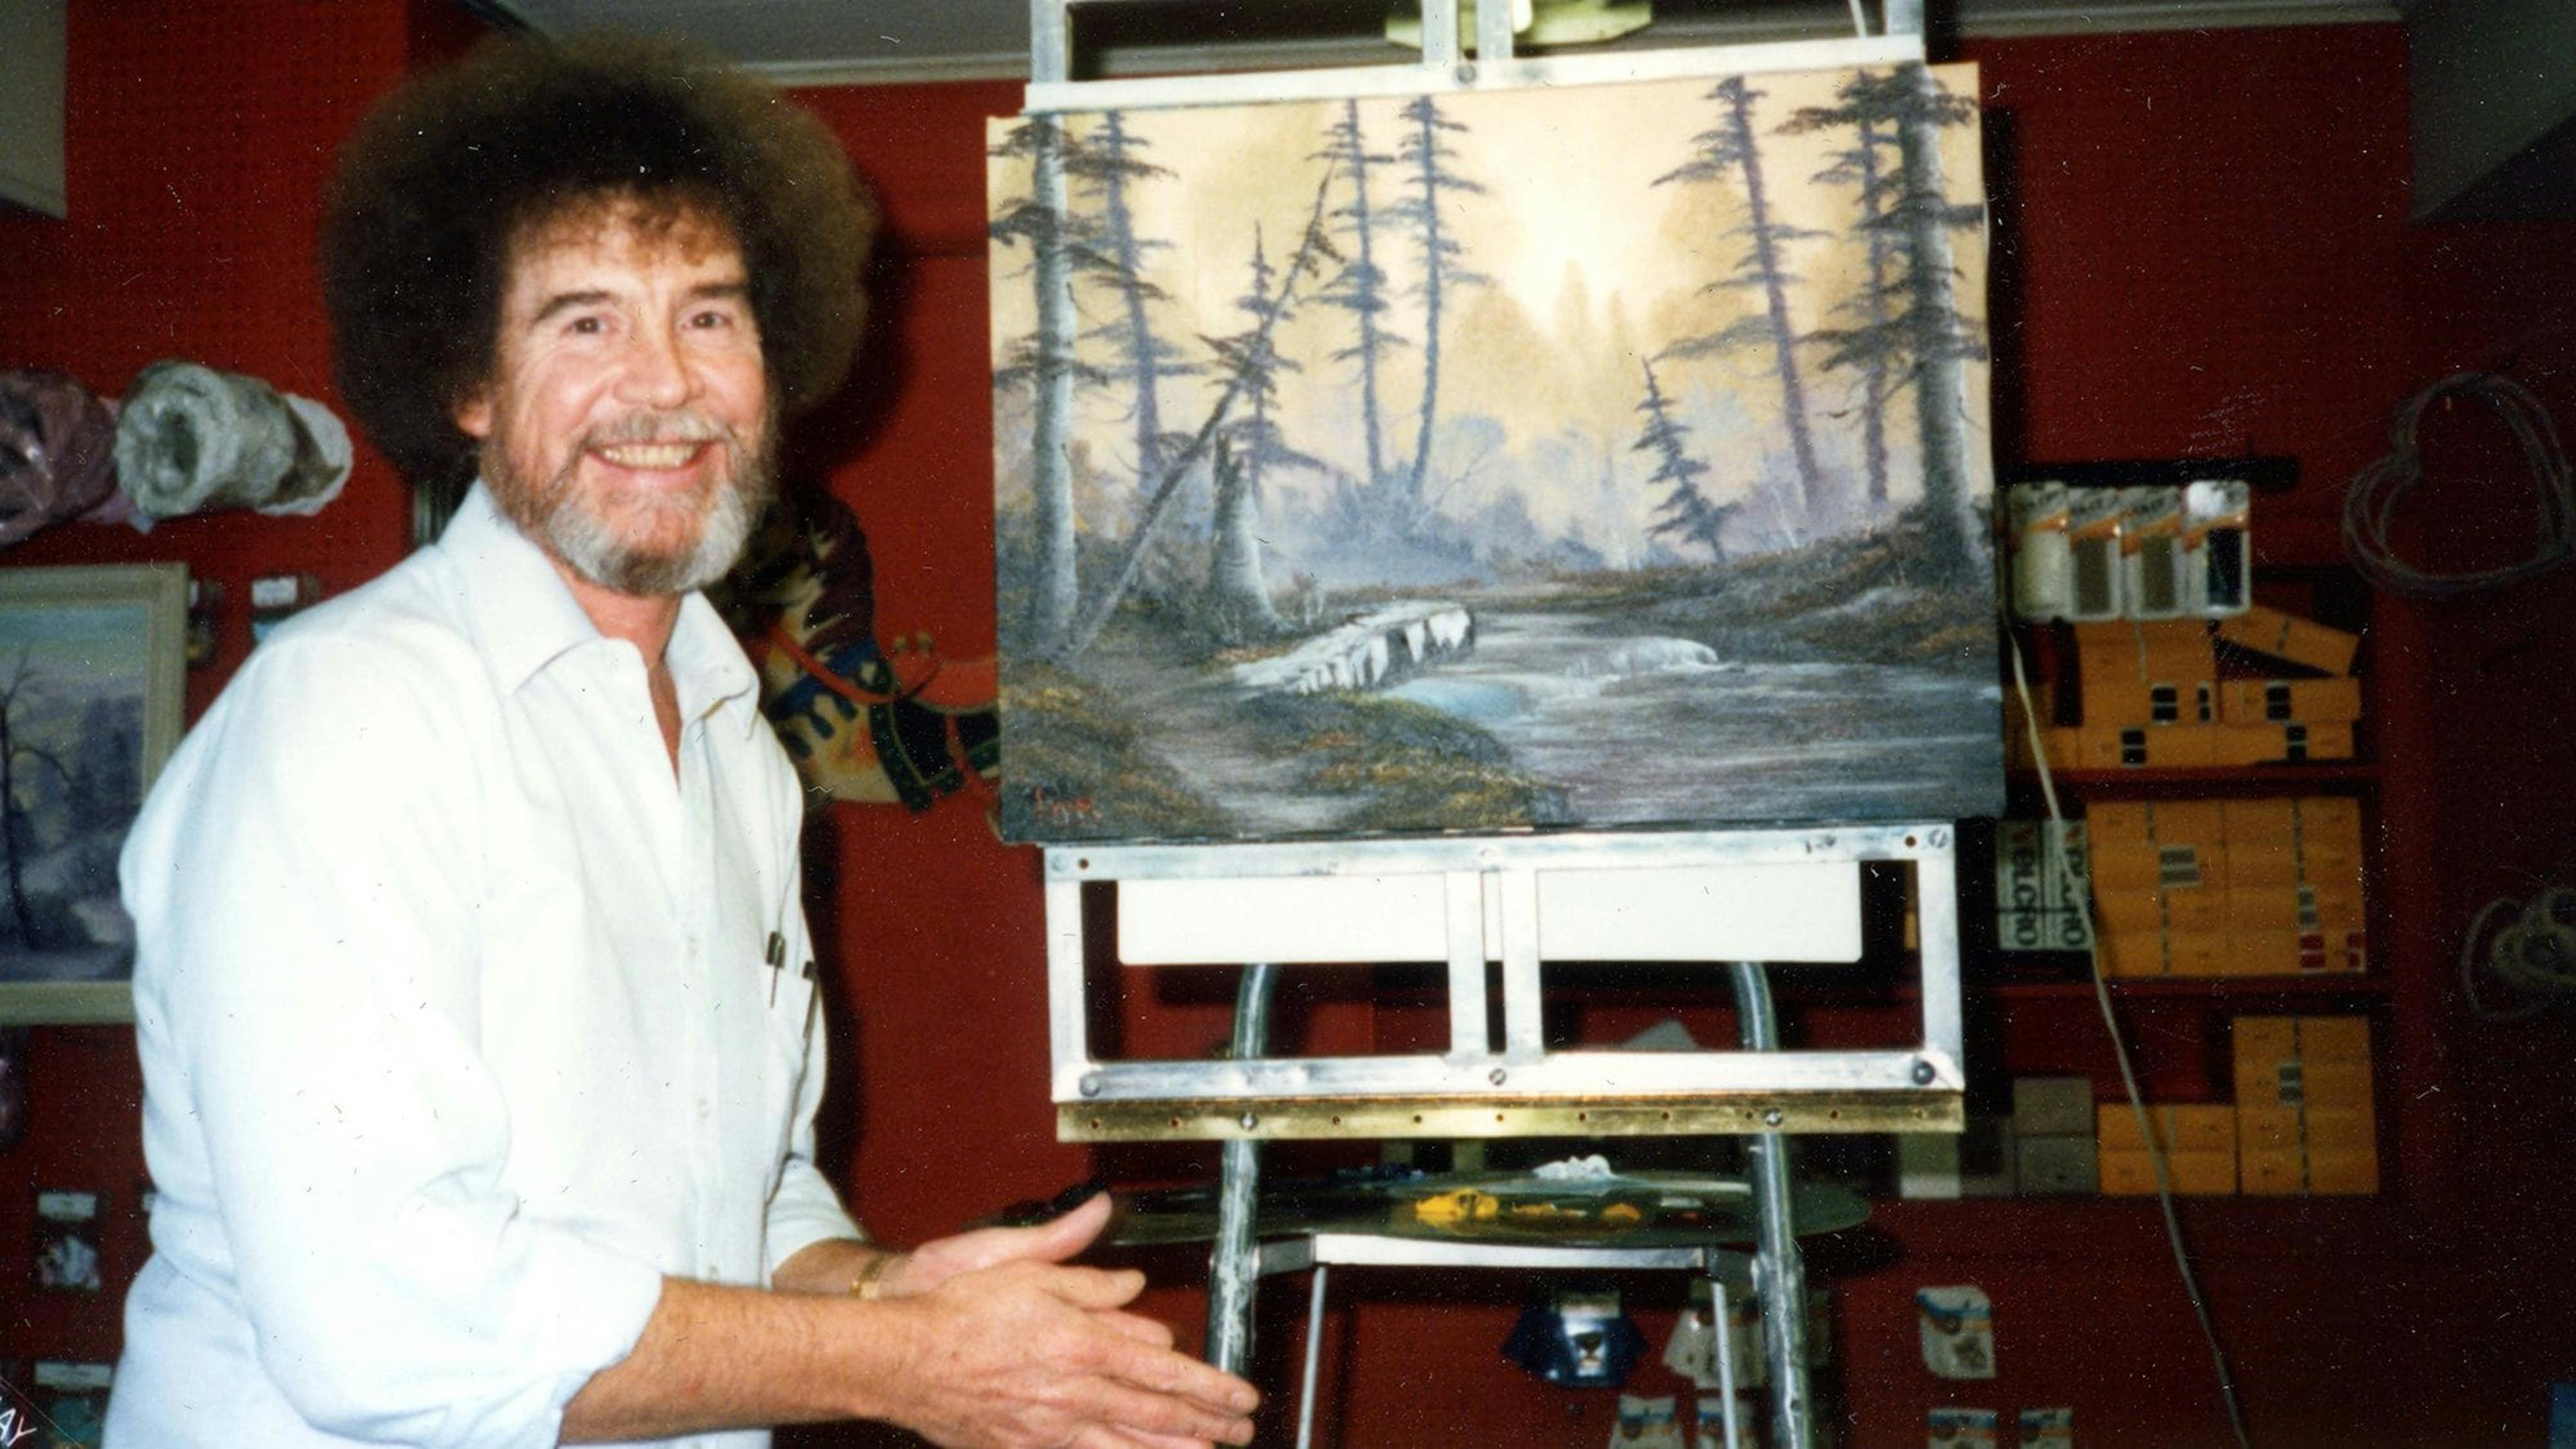 Bob Ross doing what he did best